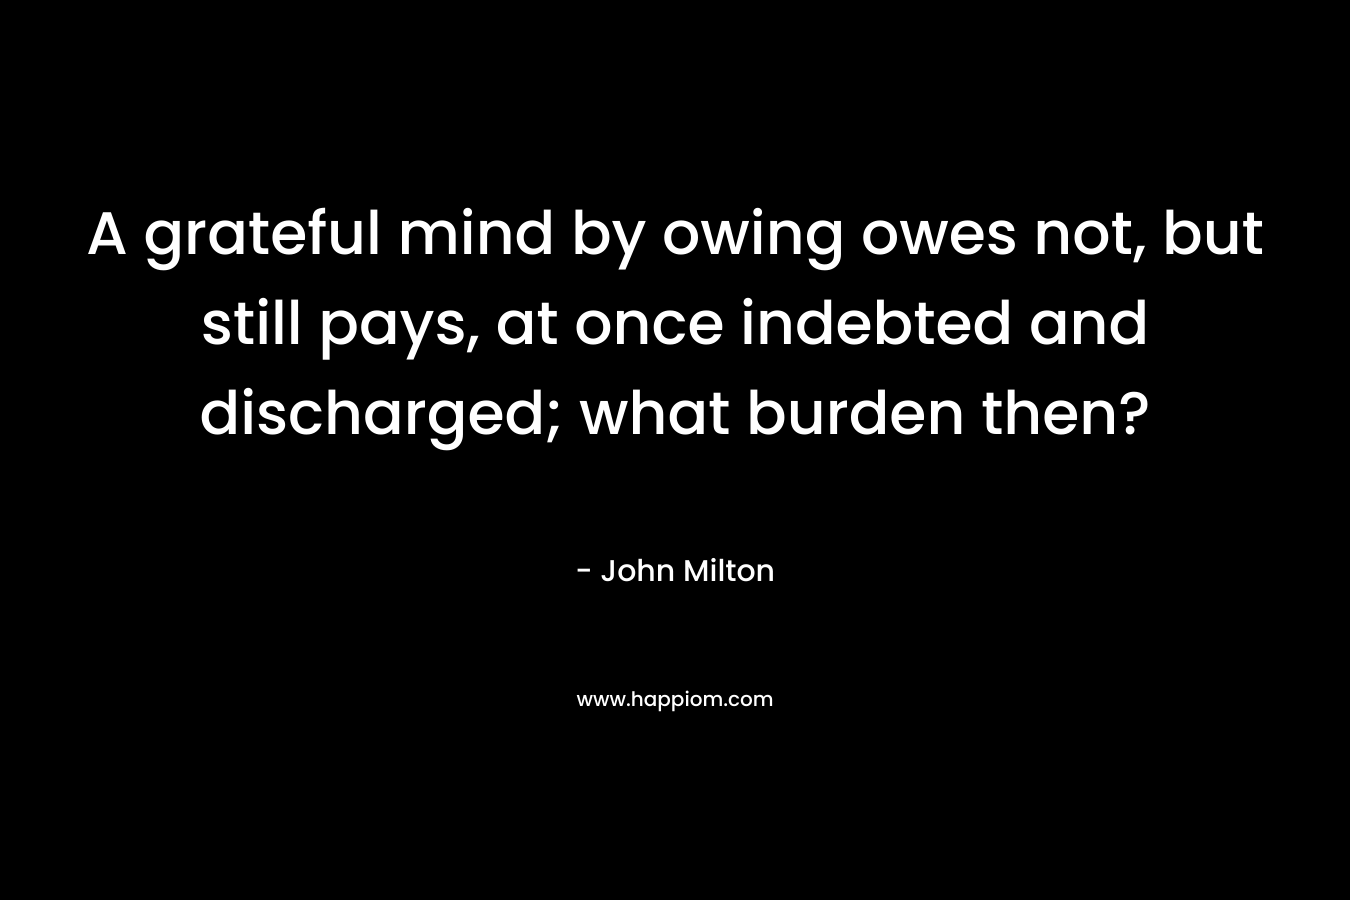 A grateful mind by owing owes not, but still pays, at once indebted and discharged; what burden then? – John Milton